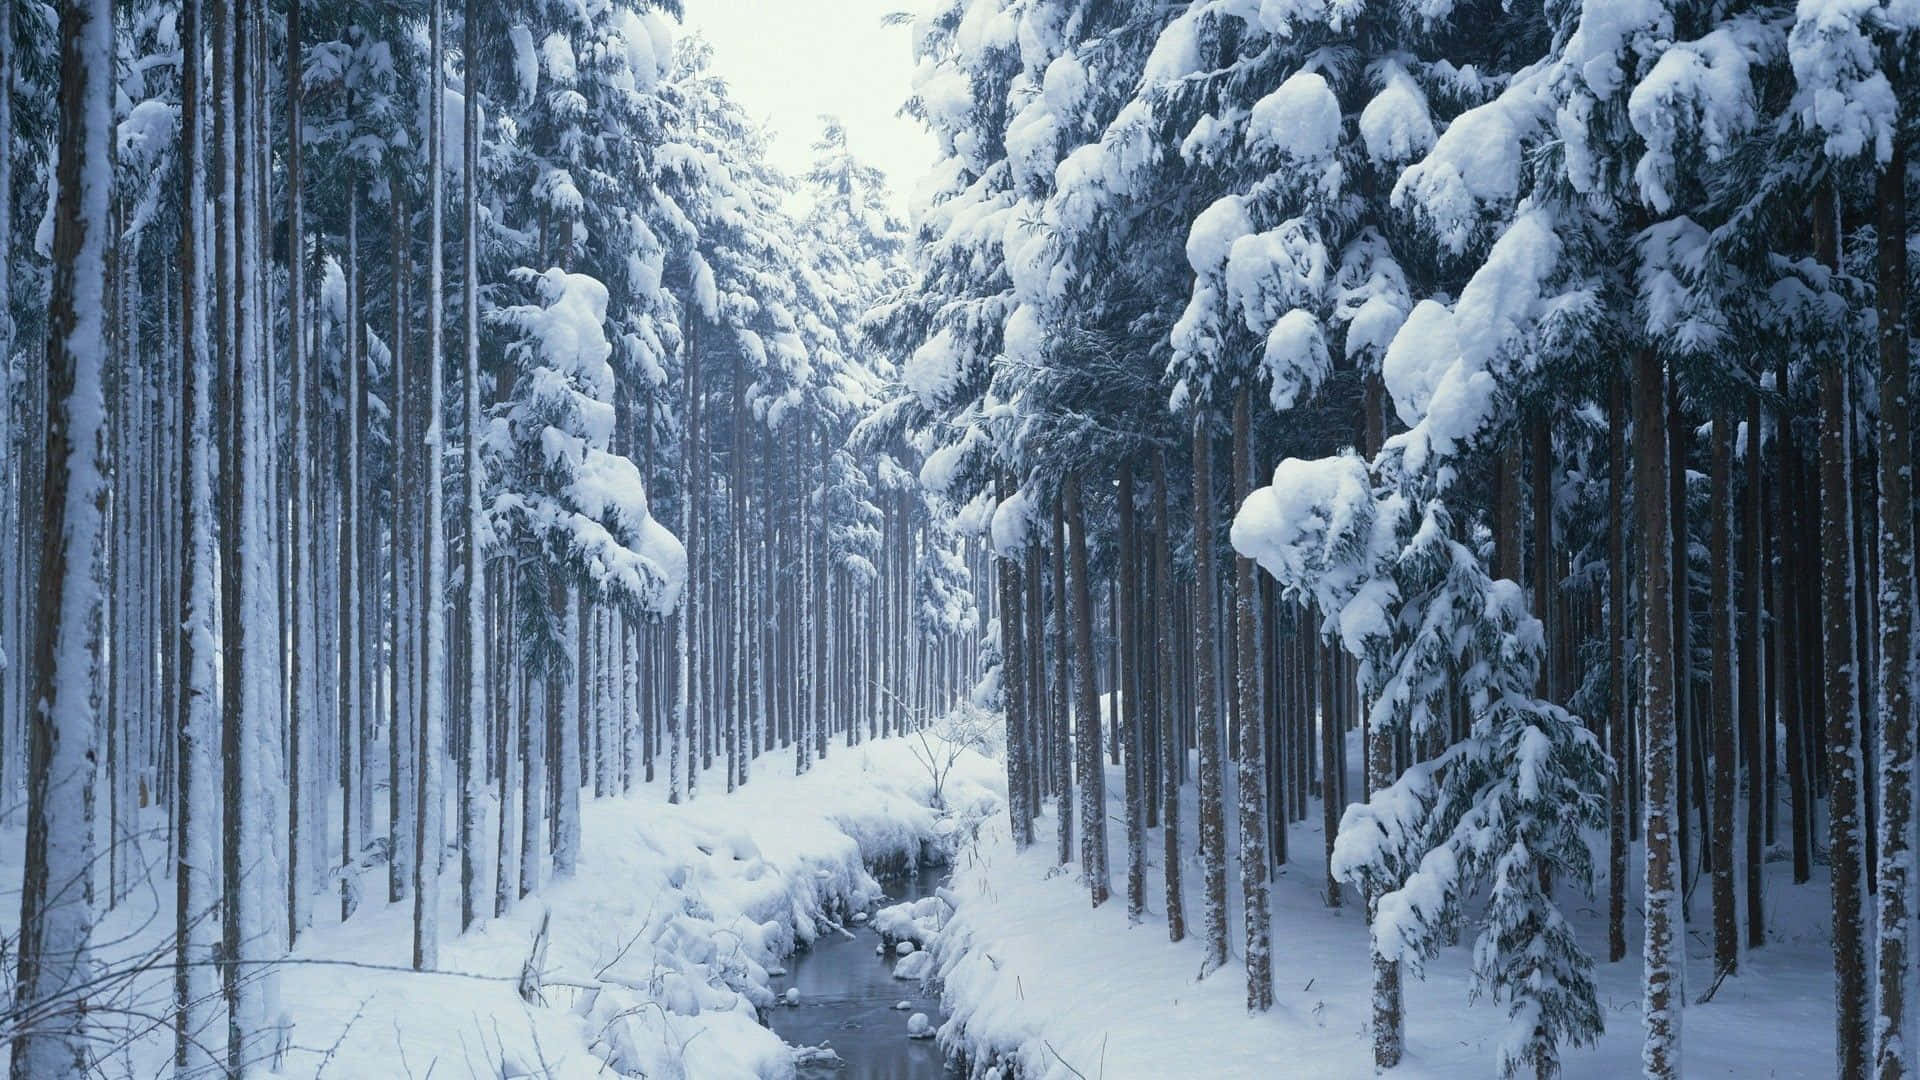 Majestic Winter Trees Covered in Snow Wallpaper